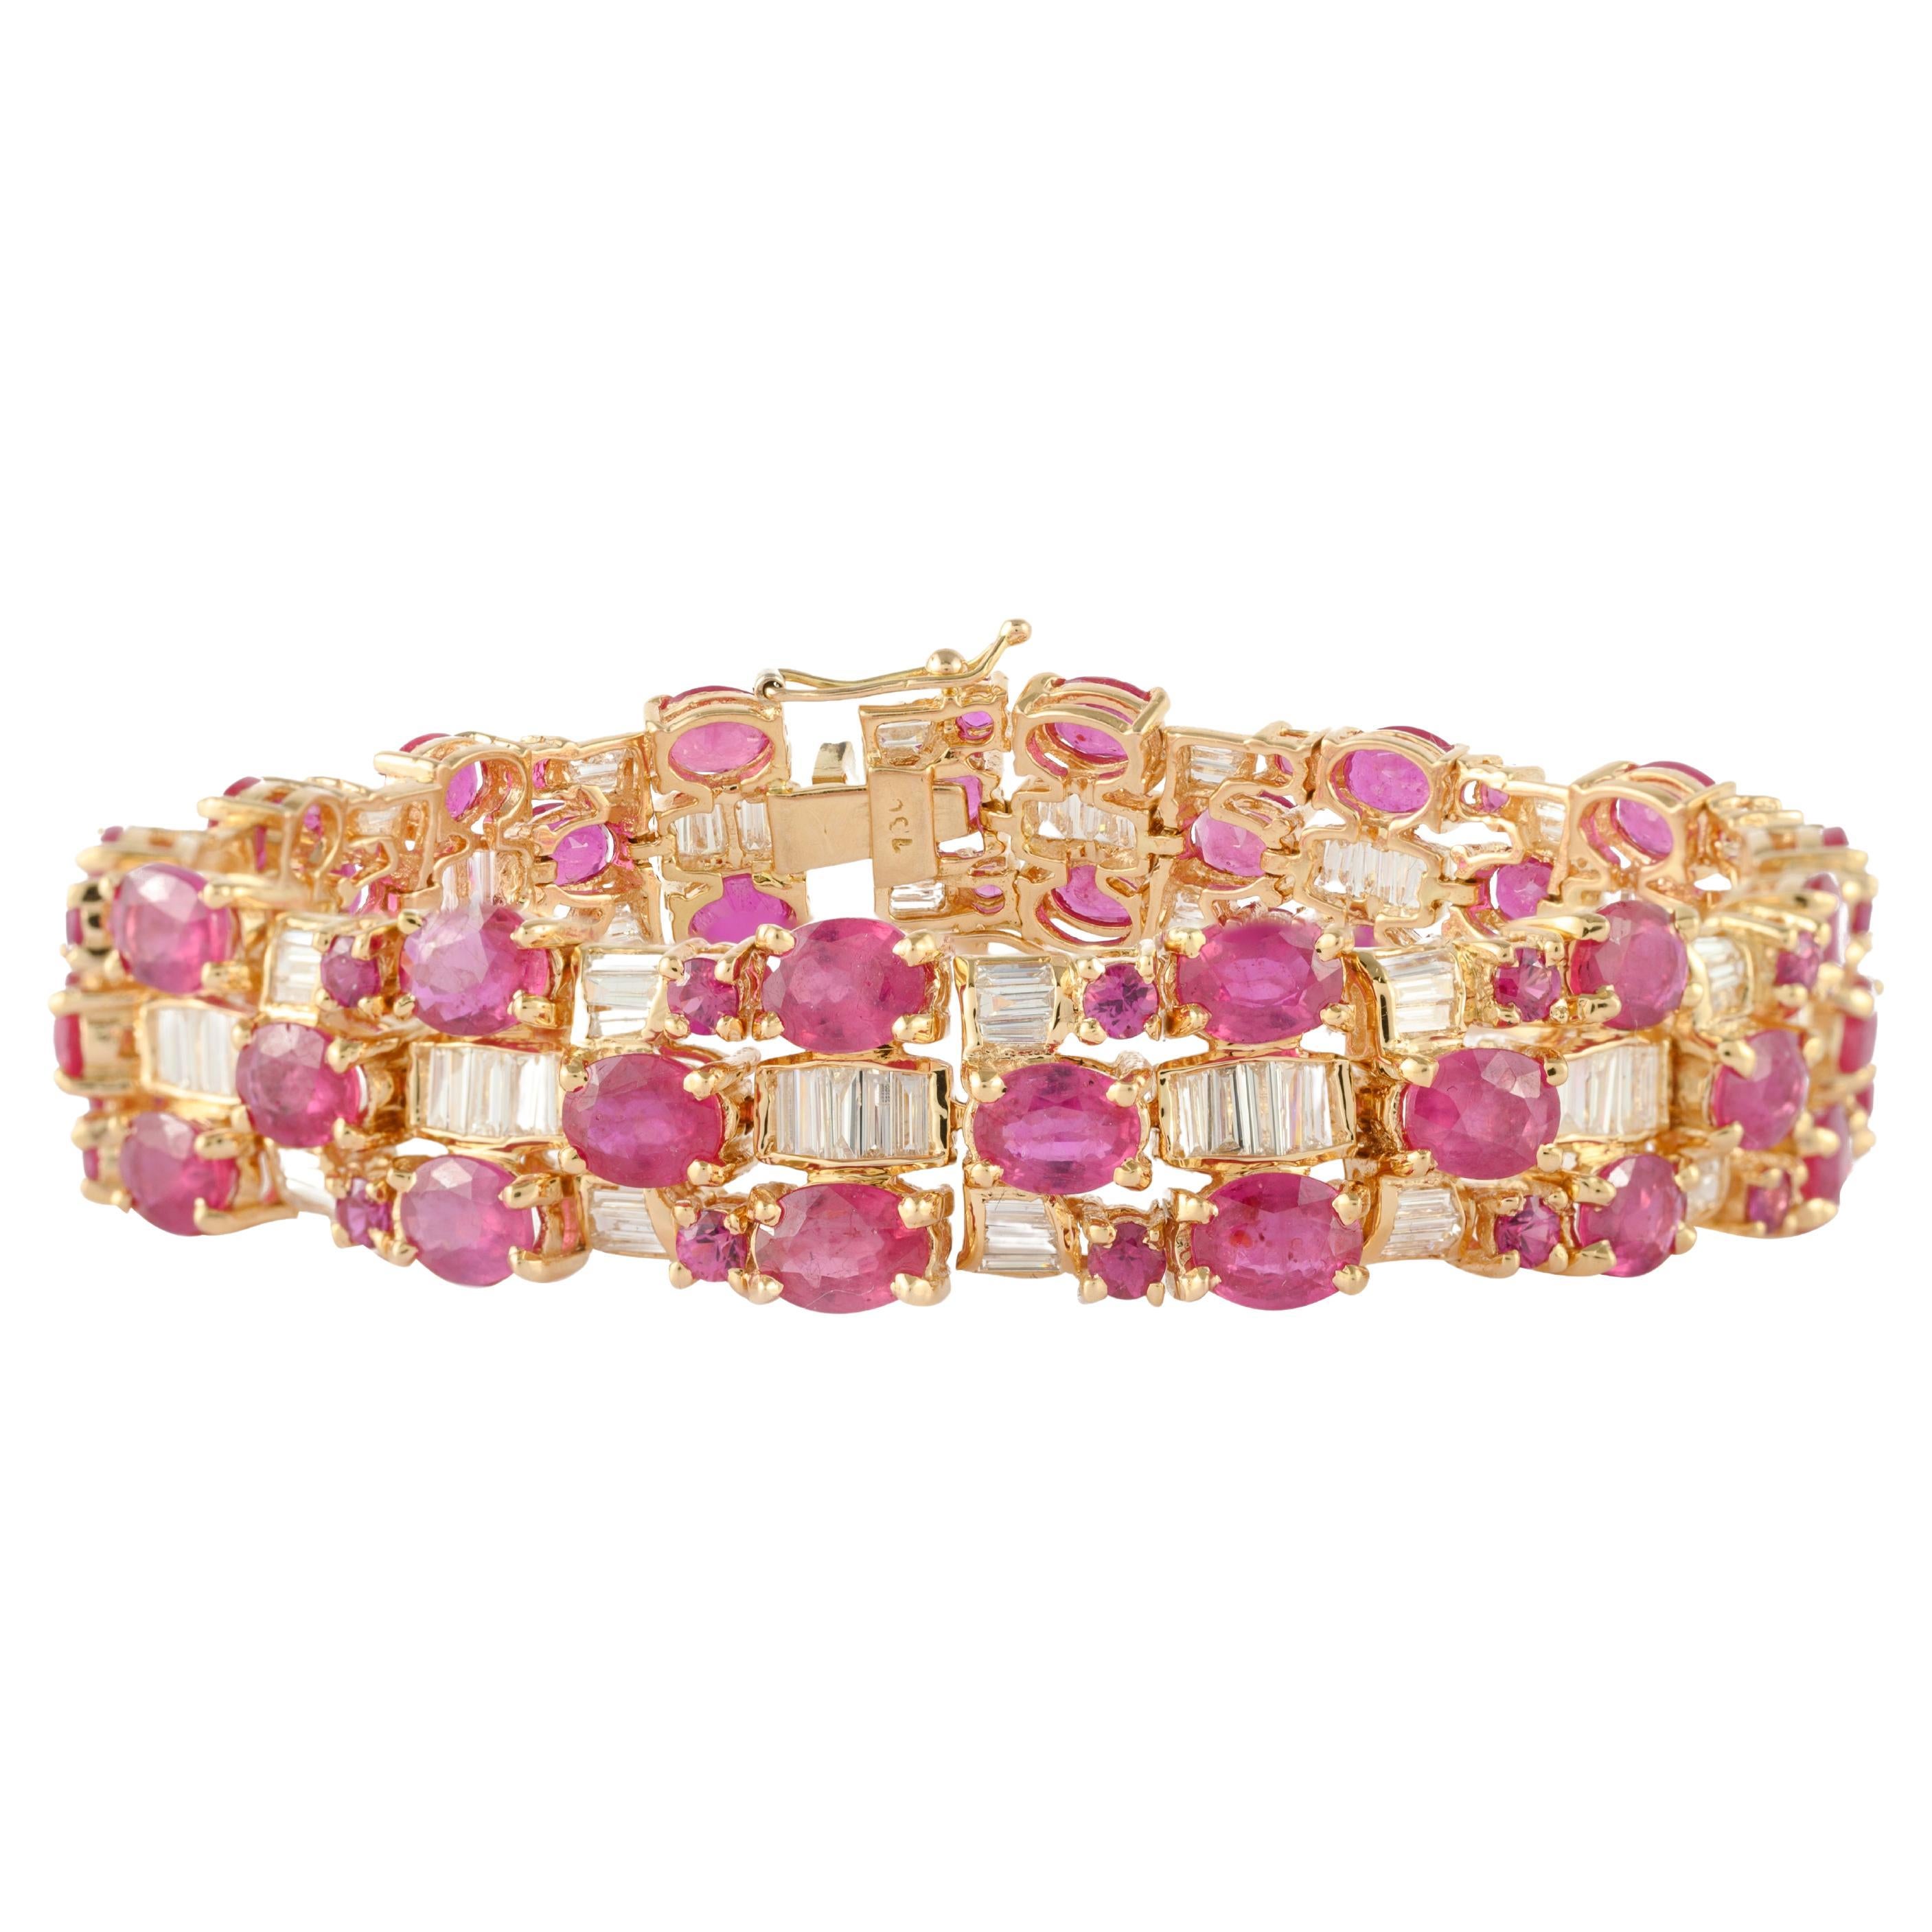 29.88 Carat Natural Ruby Art Deco Diamond Bracelet in 18k Solid Yellow Gold For Sale